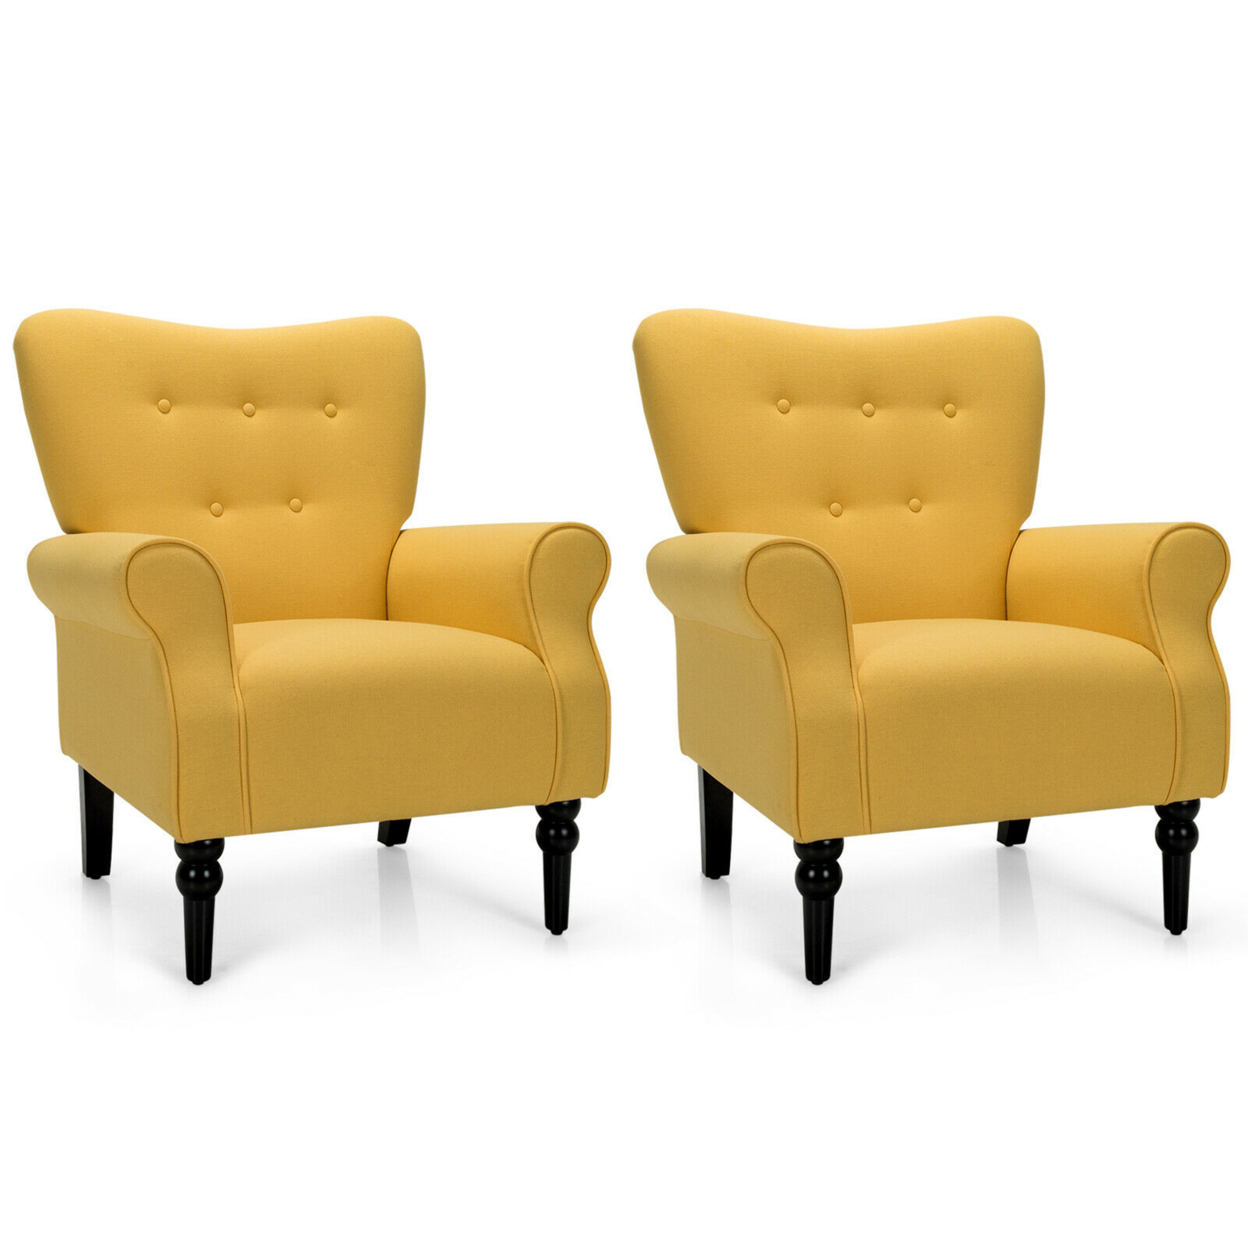 Set Of 2 Modern Accent Chairs W/ Tufted Back & Rubber Wood Legs - Yellow